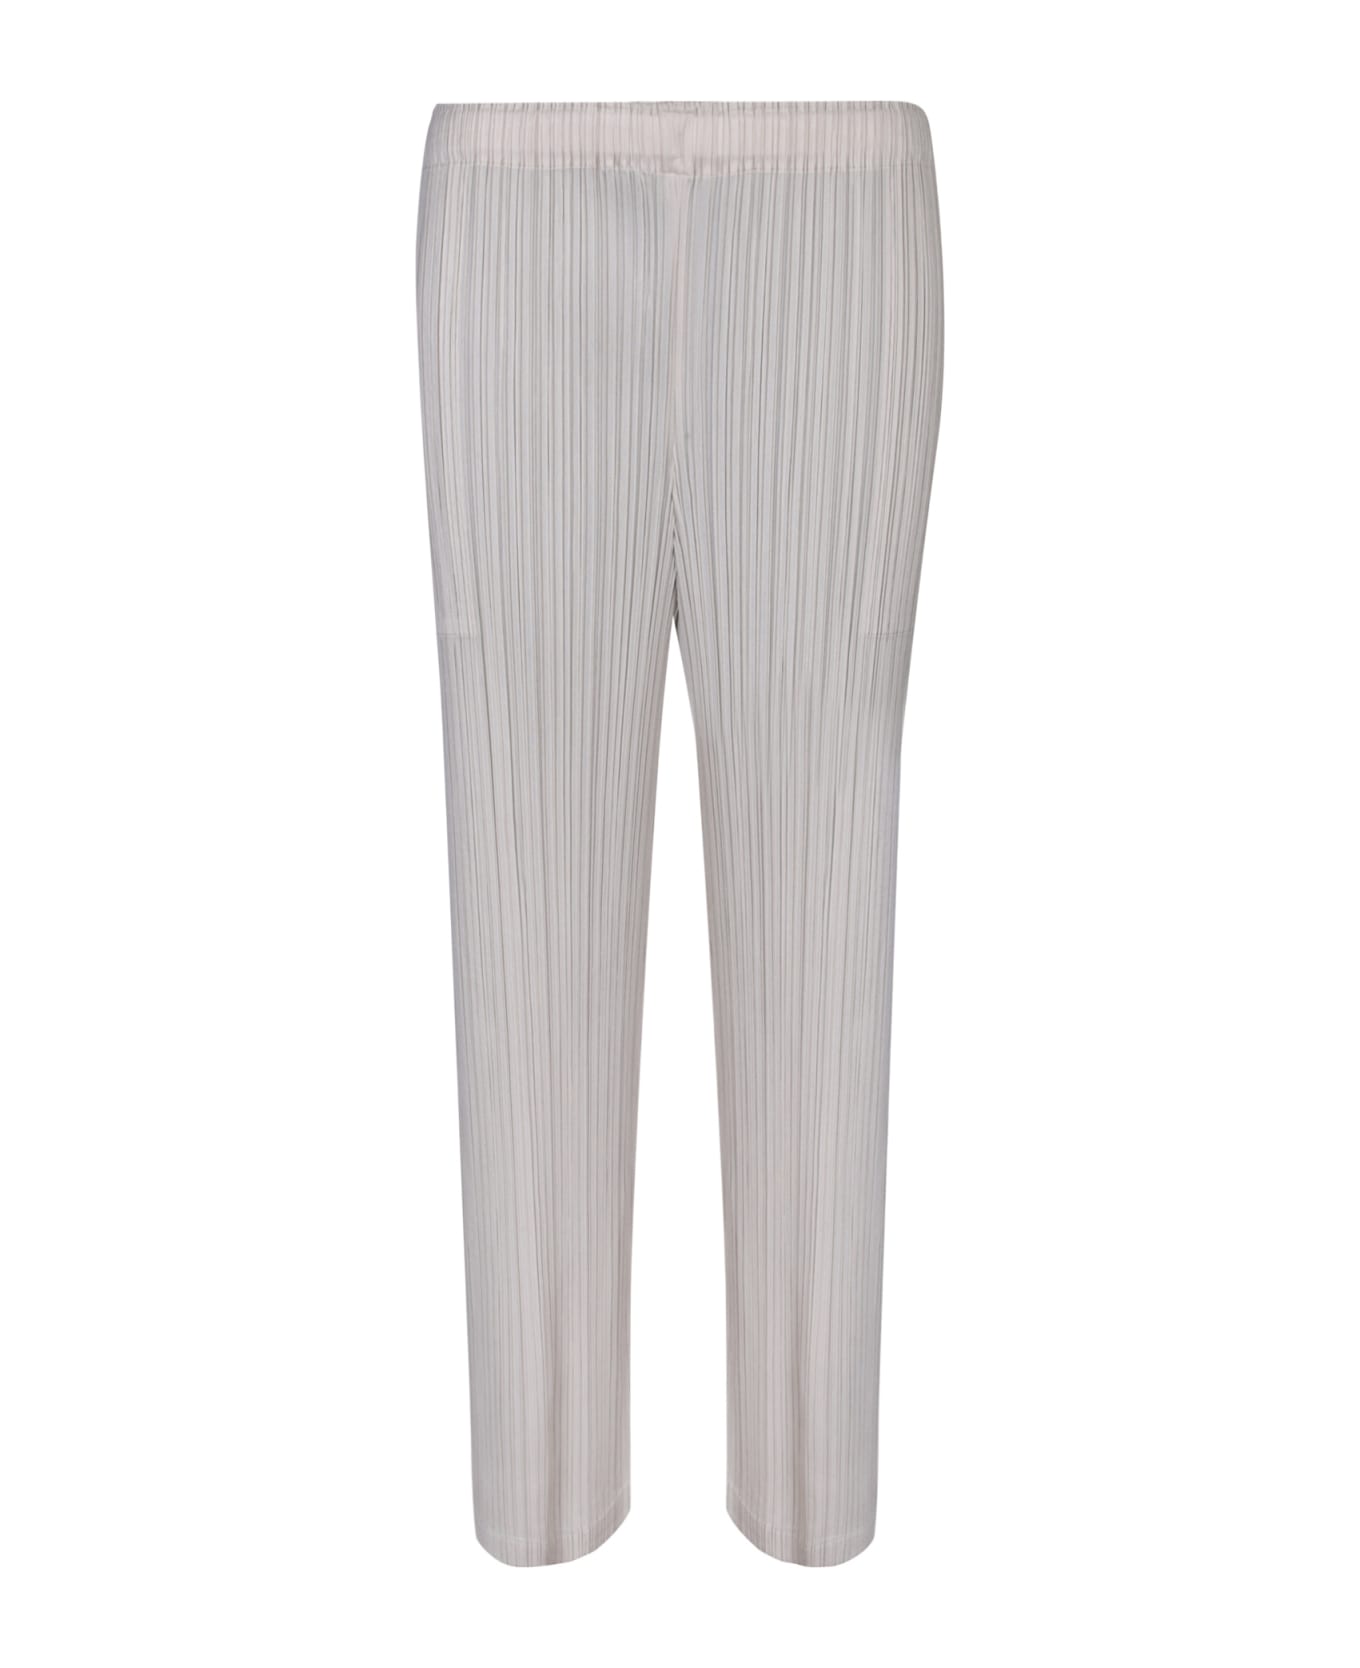 Issey Miyake Pleats Please Ivory Straight Trousers - White ボトムス